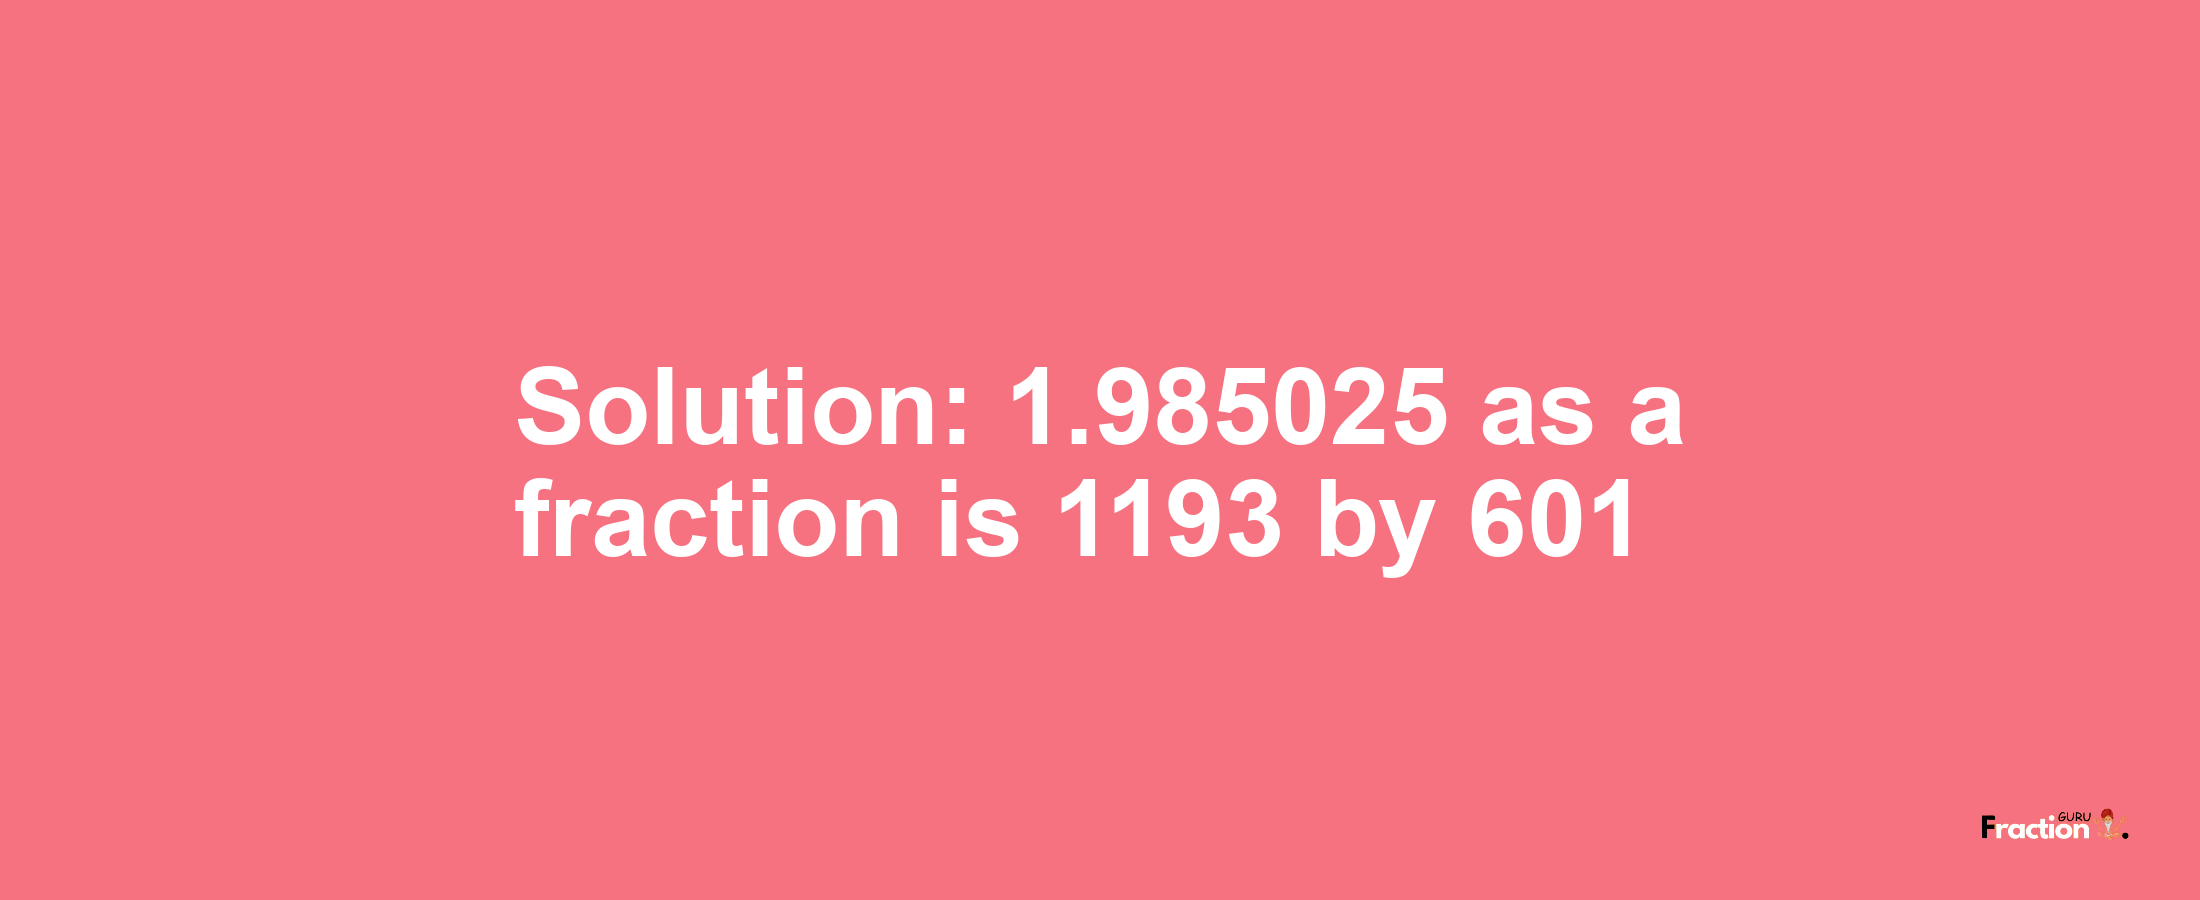 Solution:1.985025 as a fraction is 1193/601